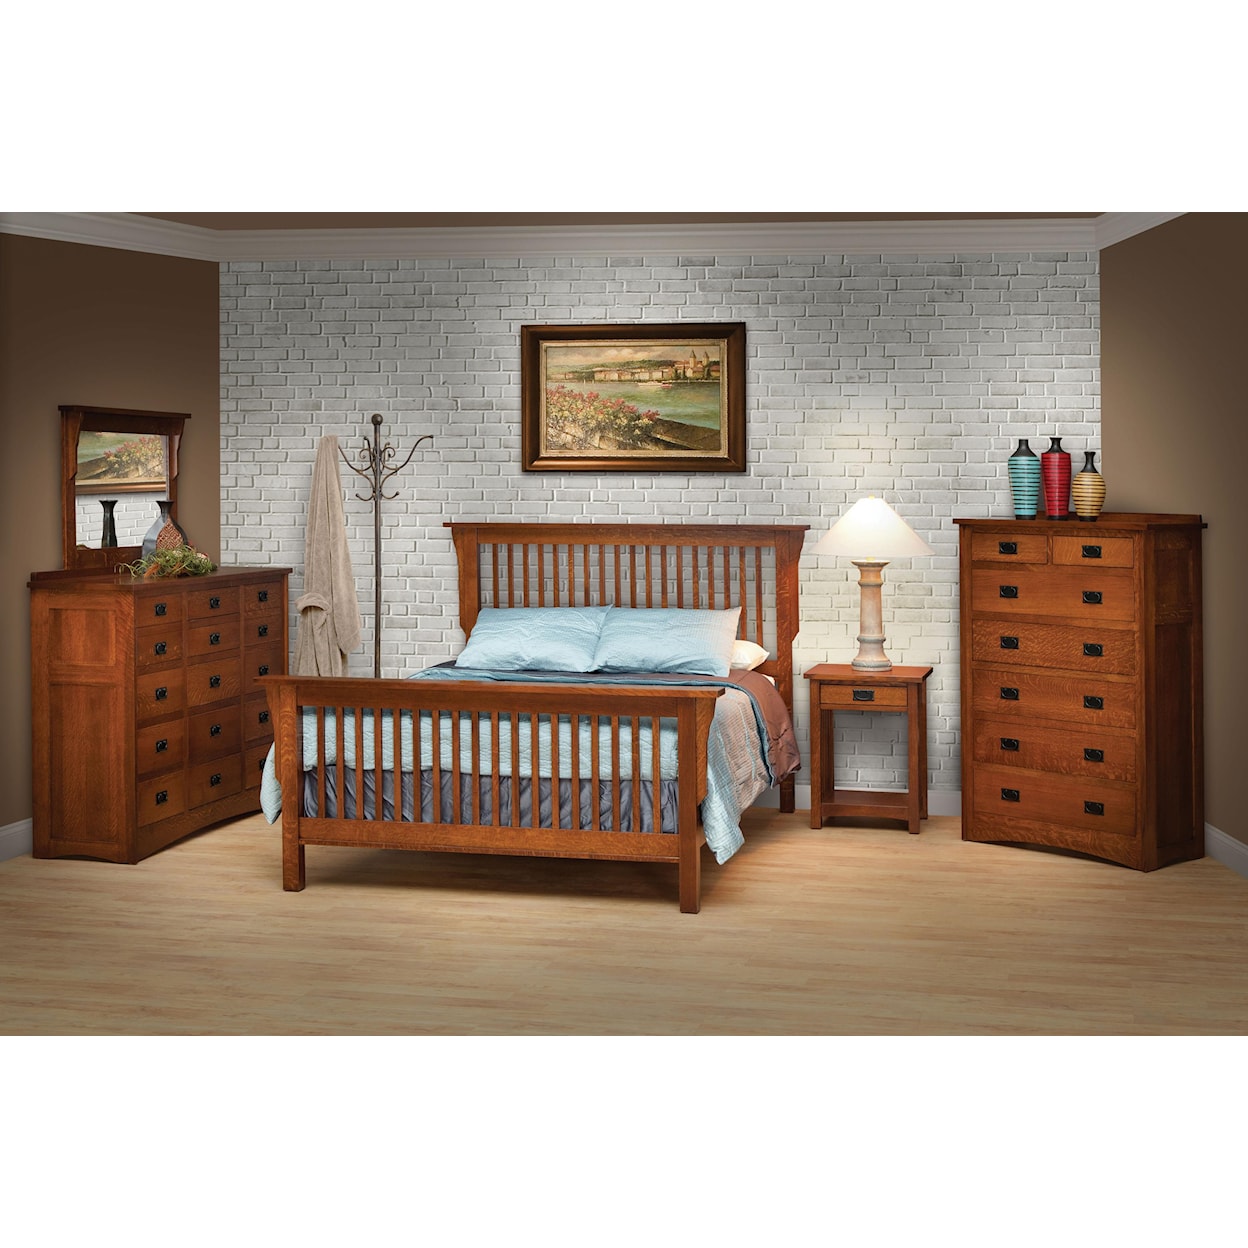 Daniels Amish Mission Queen Frame Bed 